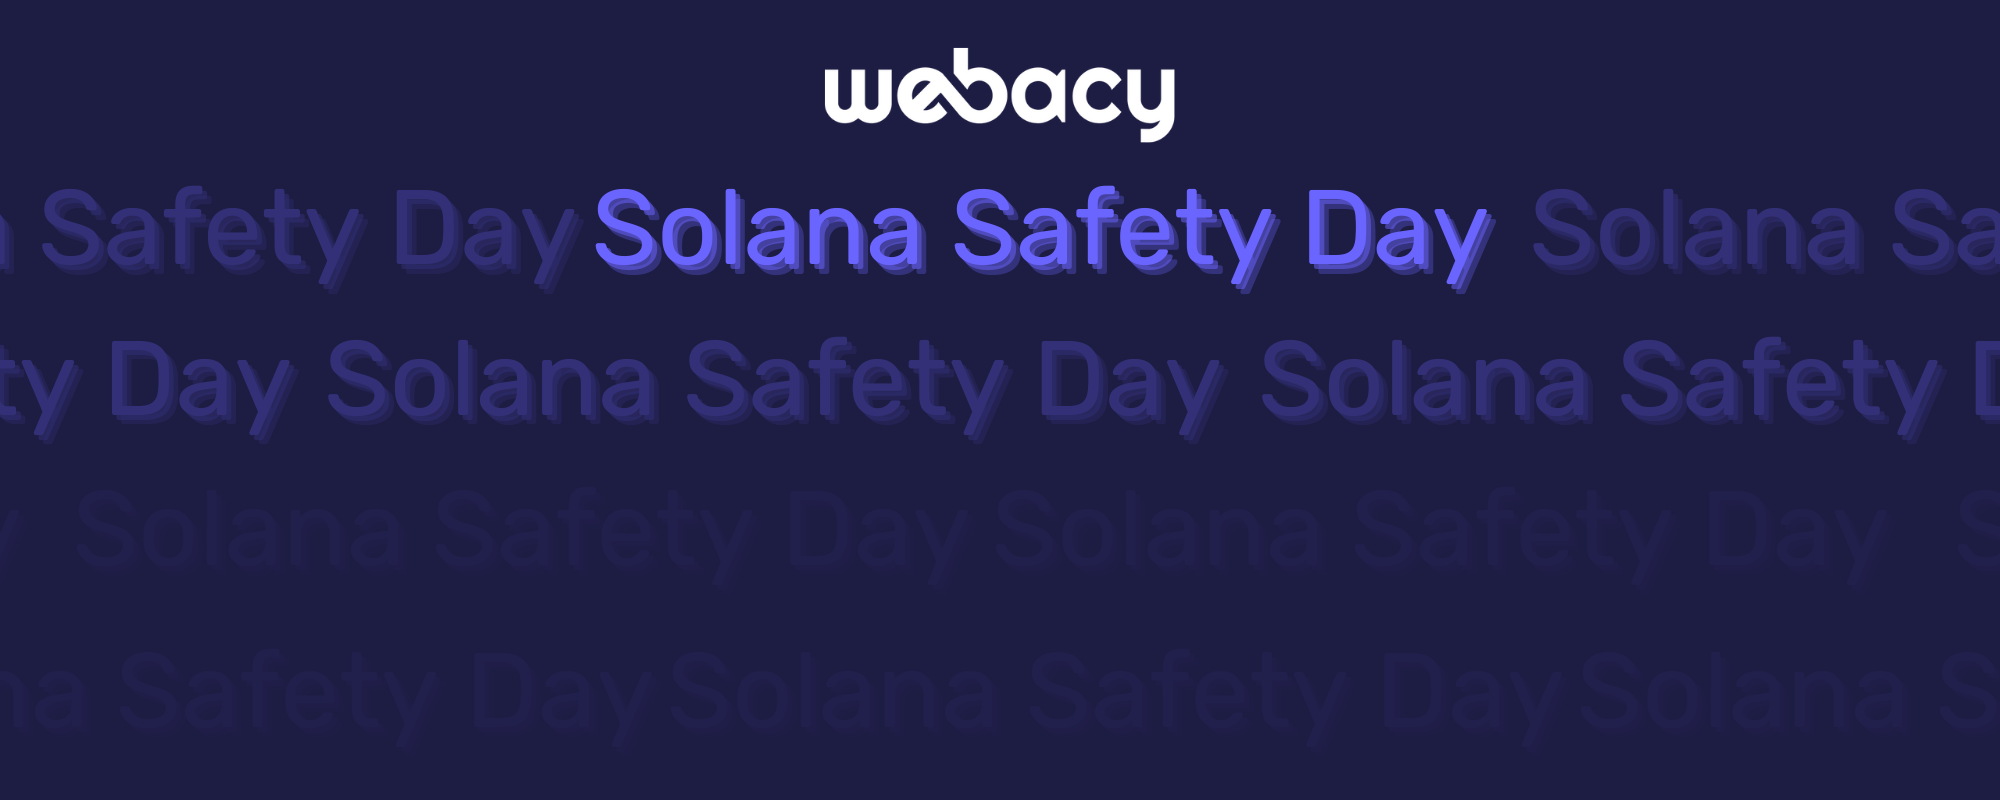 Solana Safety Day: It’s All About Your Safety (Safe-lana on Solana)